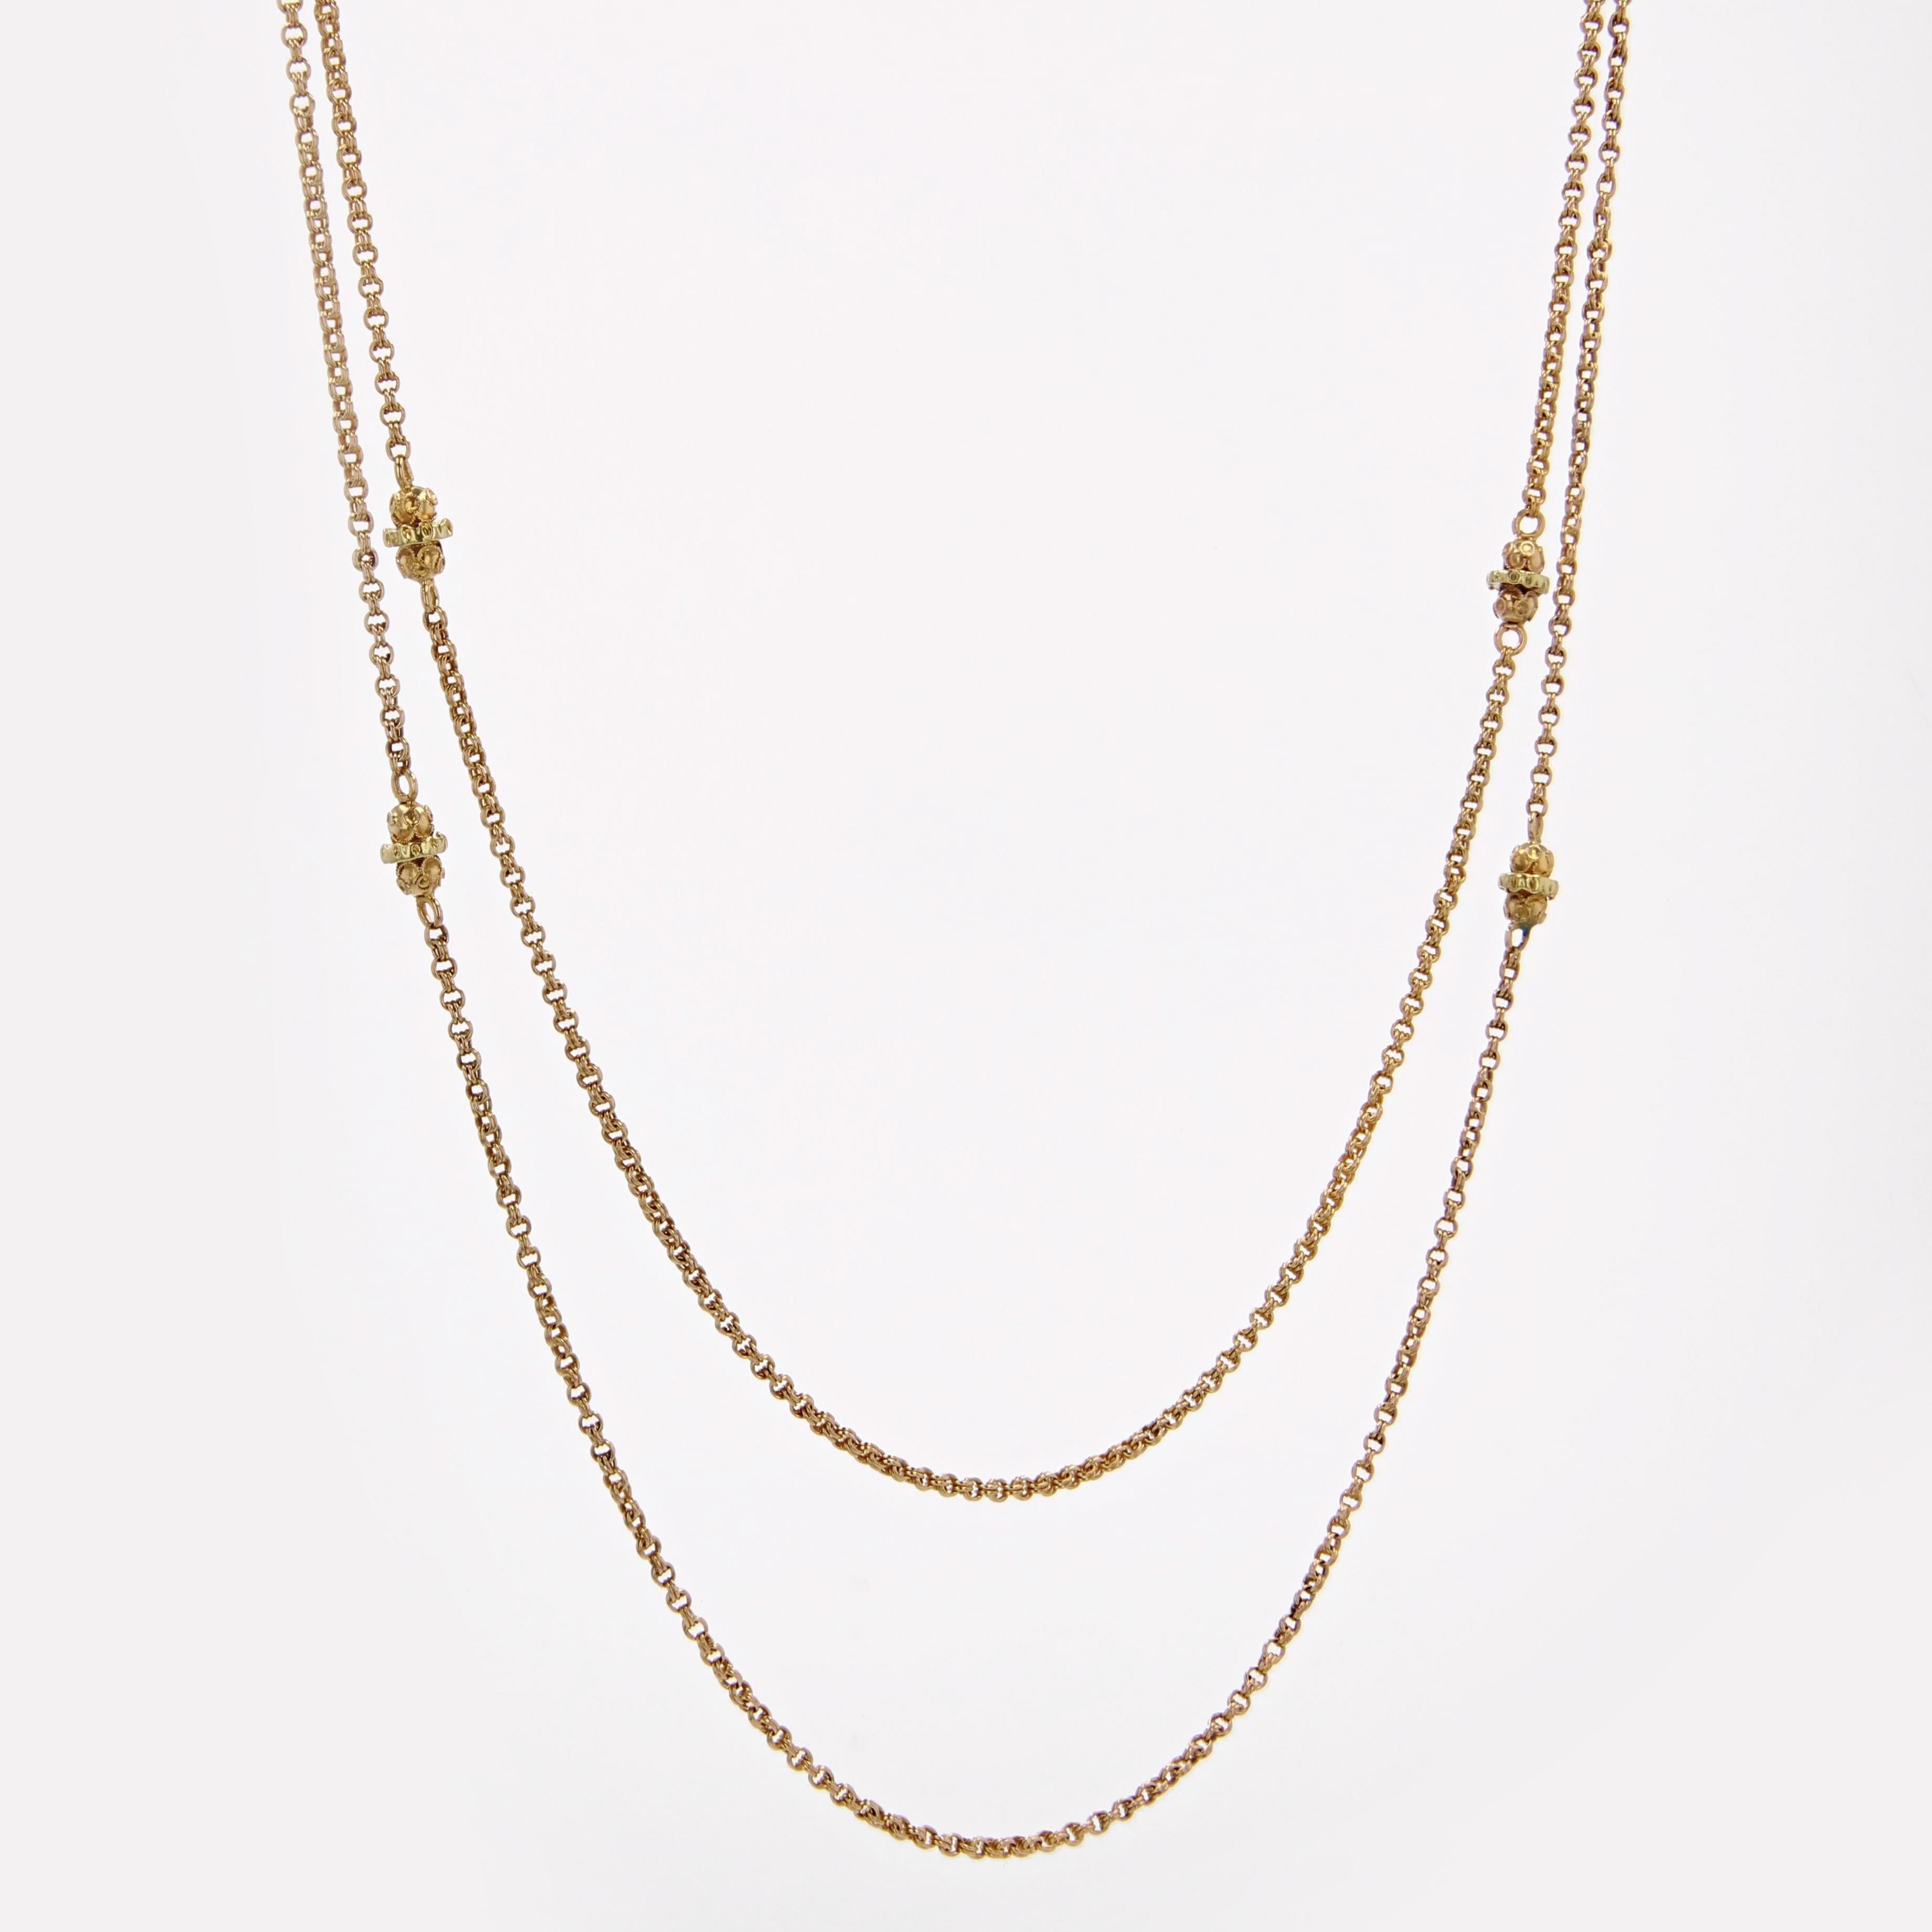 Necklace in 18 karat yellow gold.
A magnificent, fine chain in yellow gold, it features a double jaseron mesh intersected by small chased cylindrical motifs adorned with small gold cords.
This antique long necklace has no spring ring and can be worn